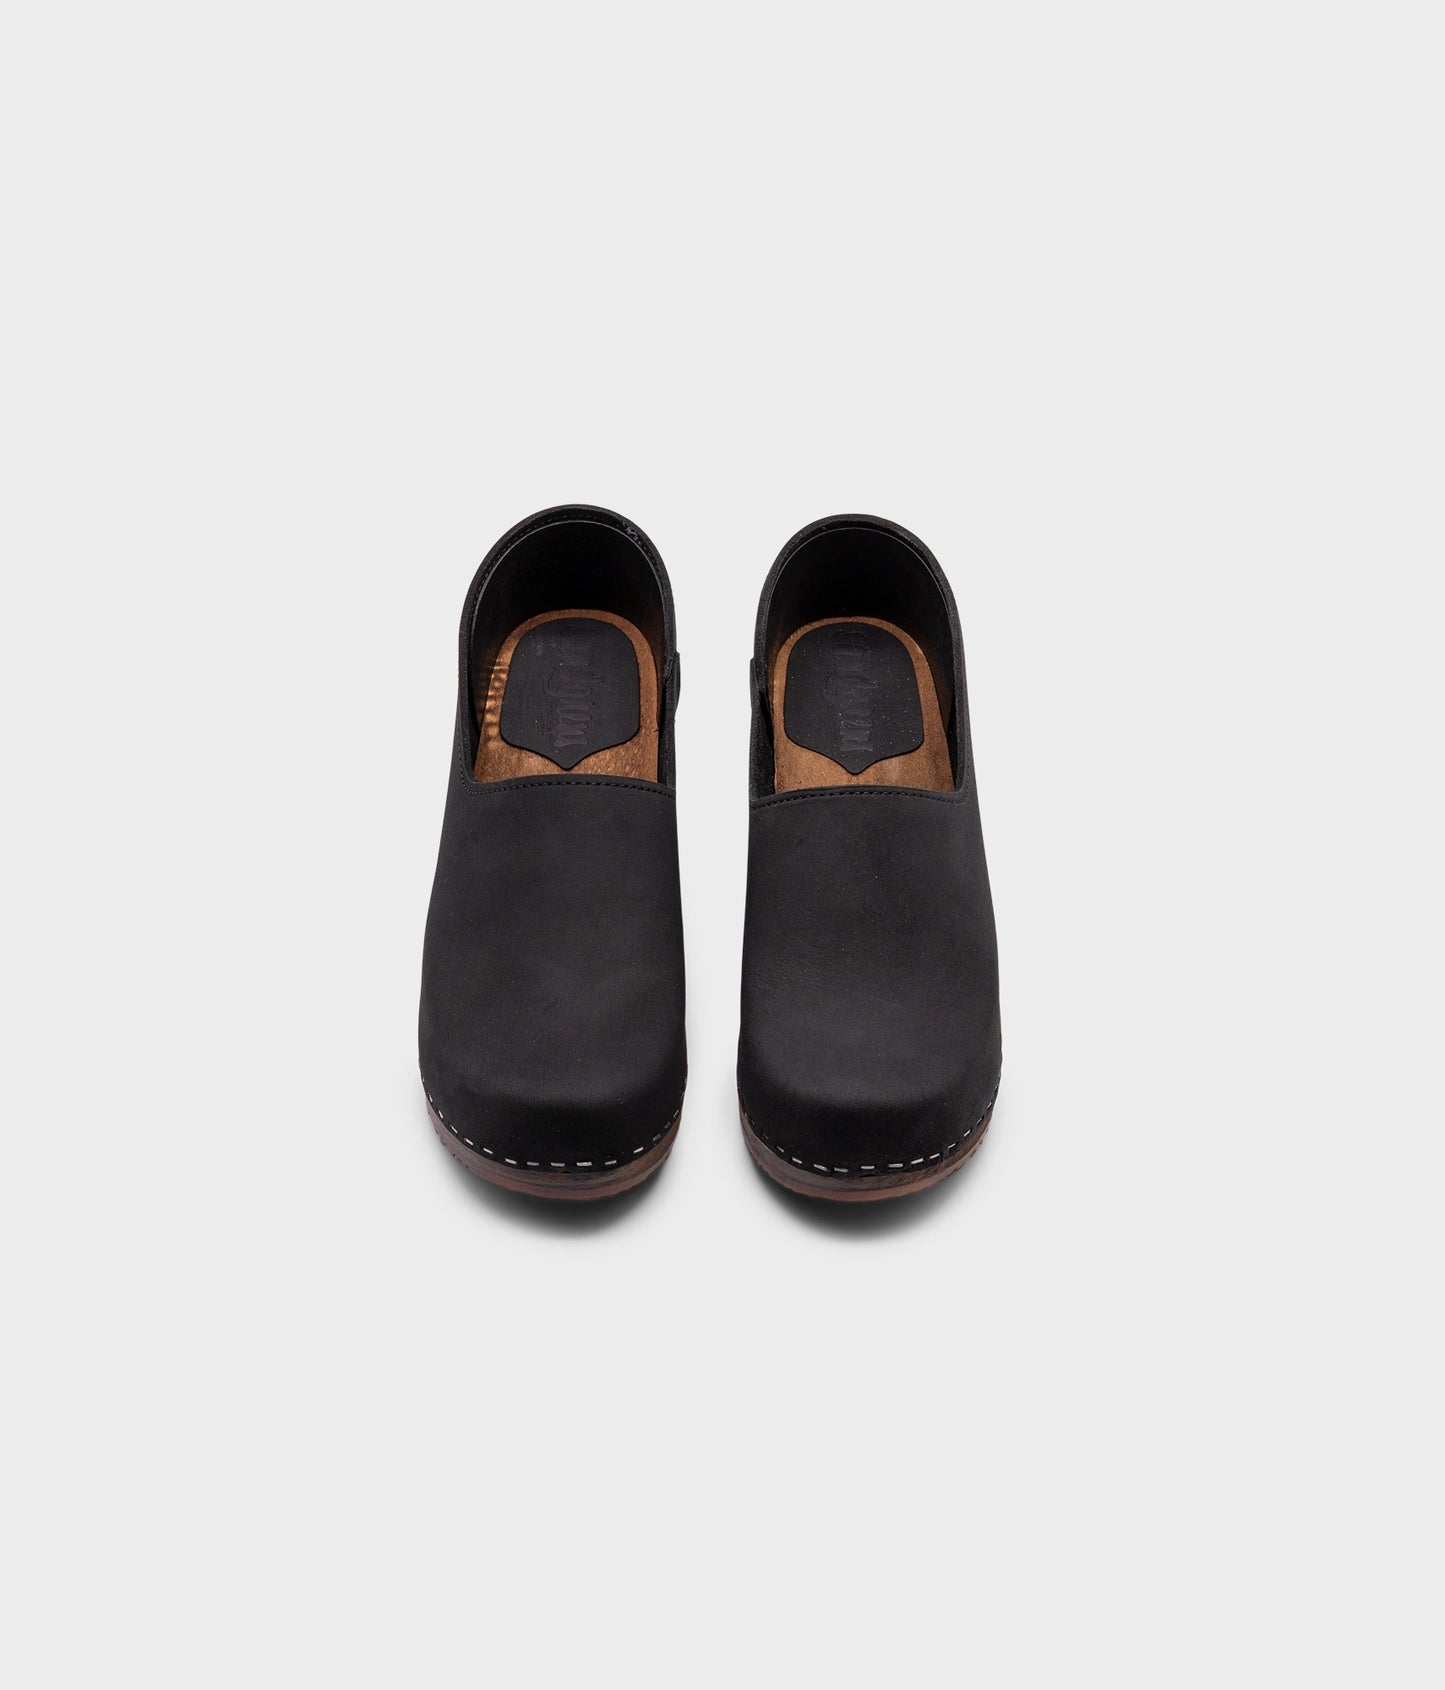 high heeled closed-back clogs in black nubuck leather stapled on a dark wooden base